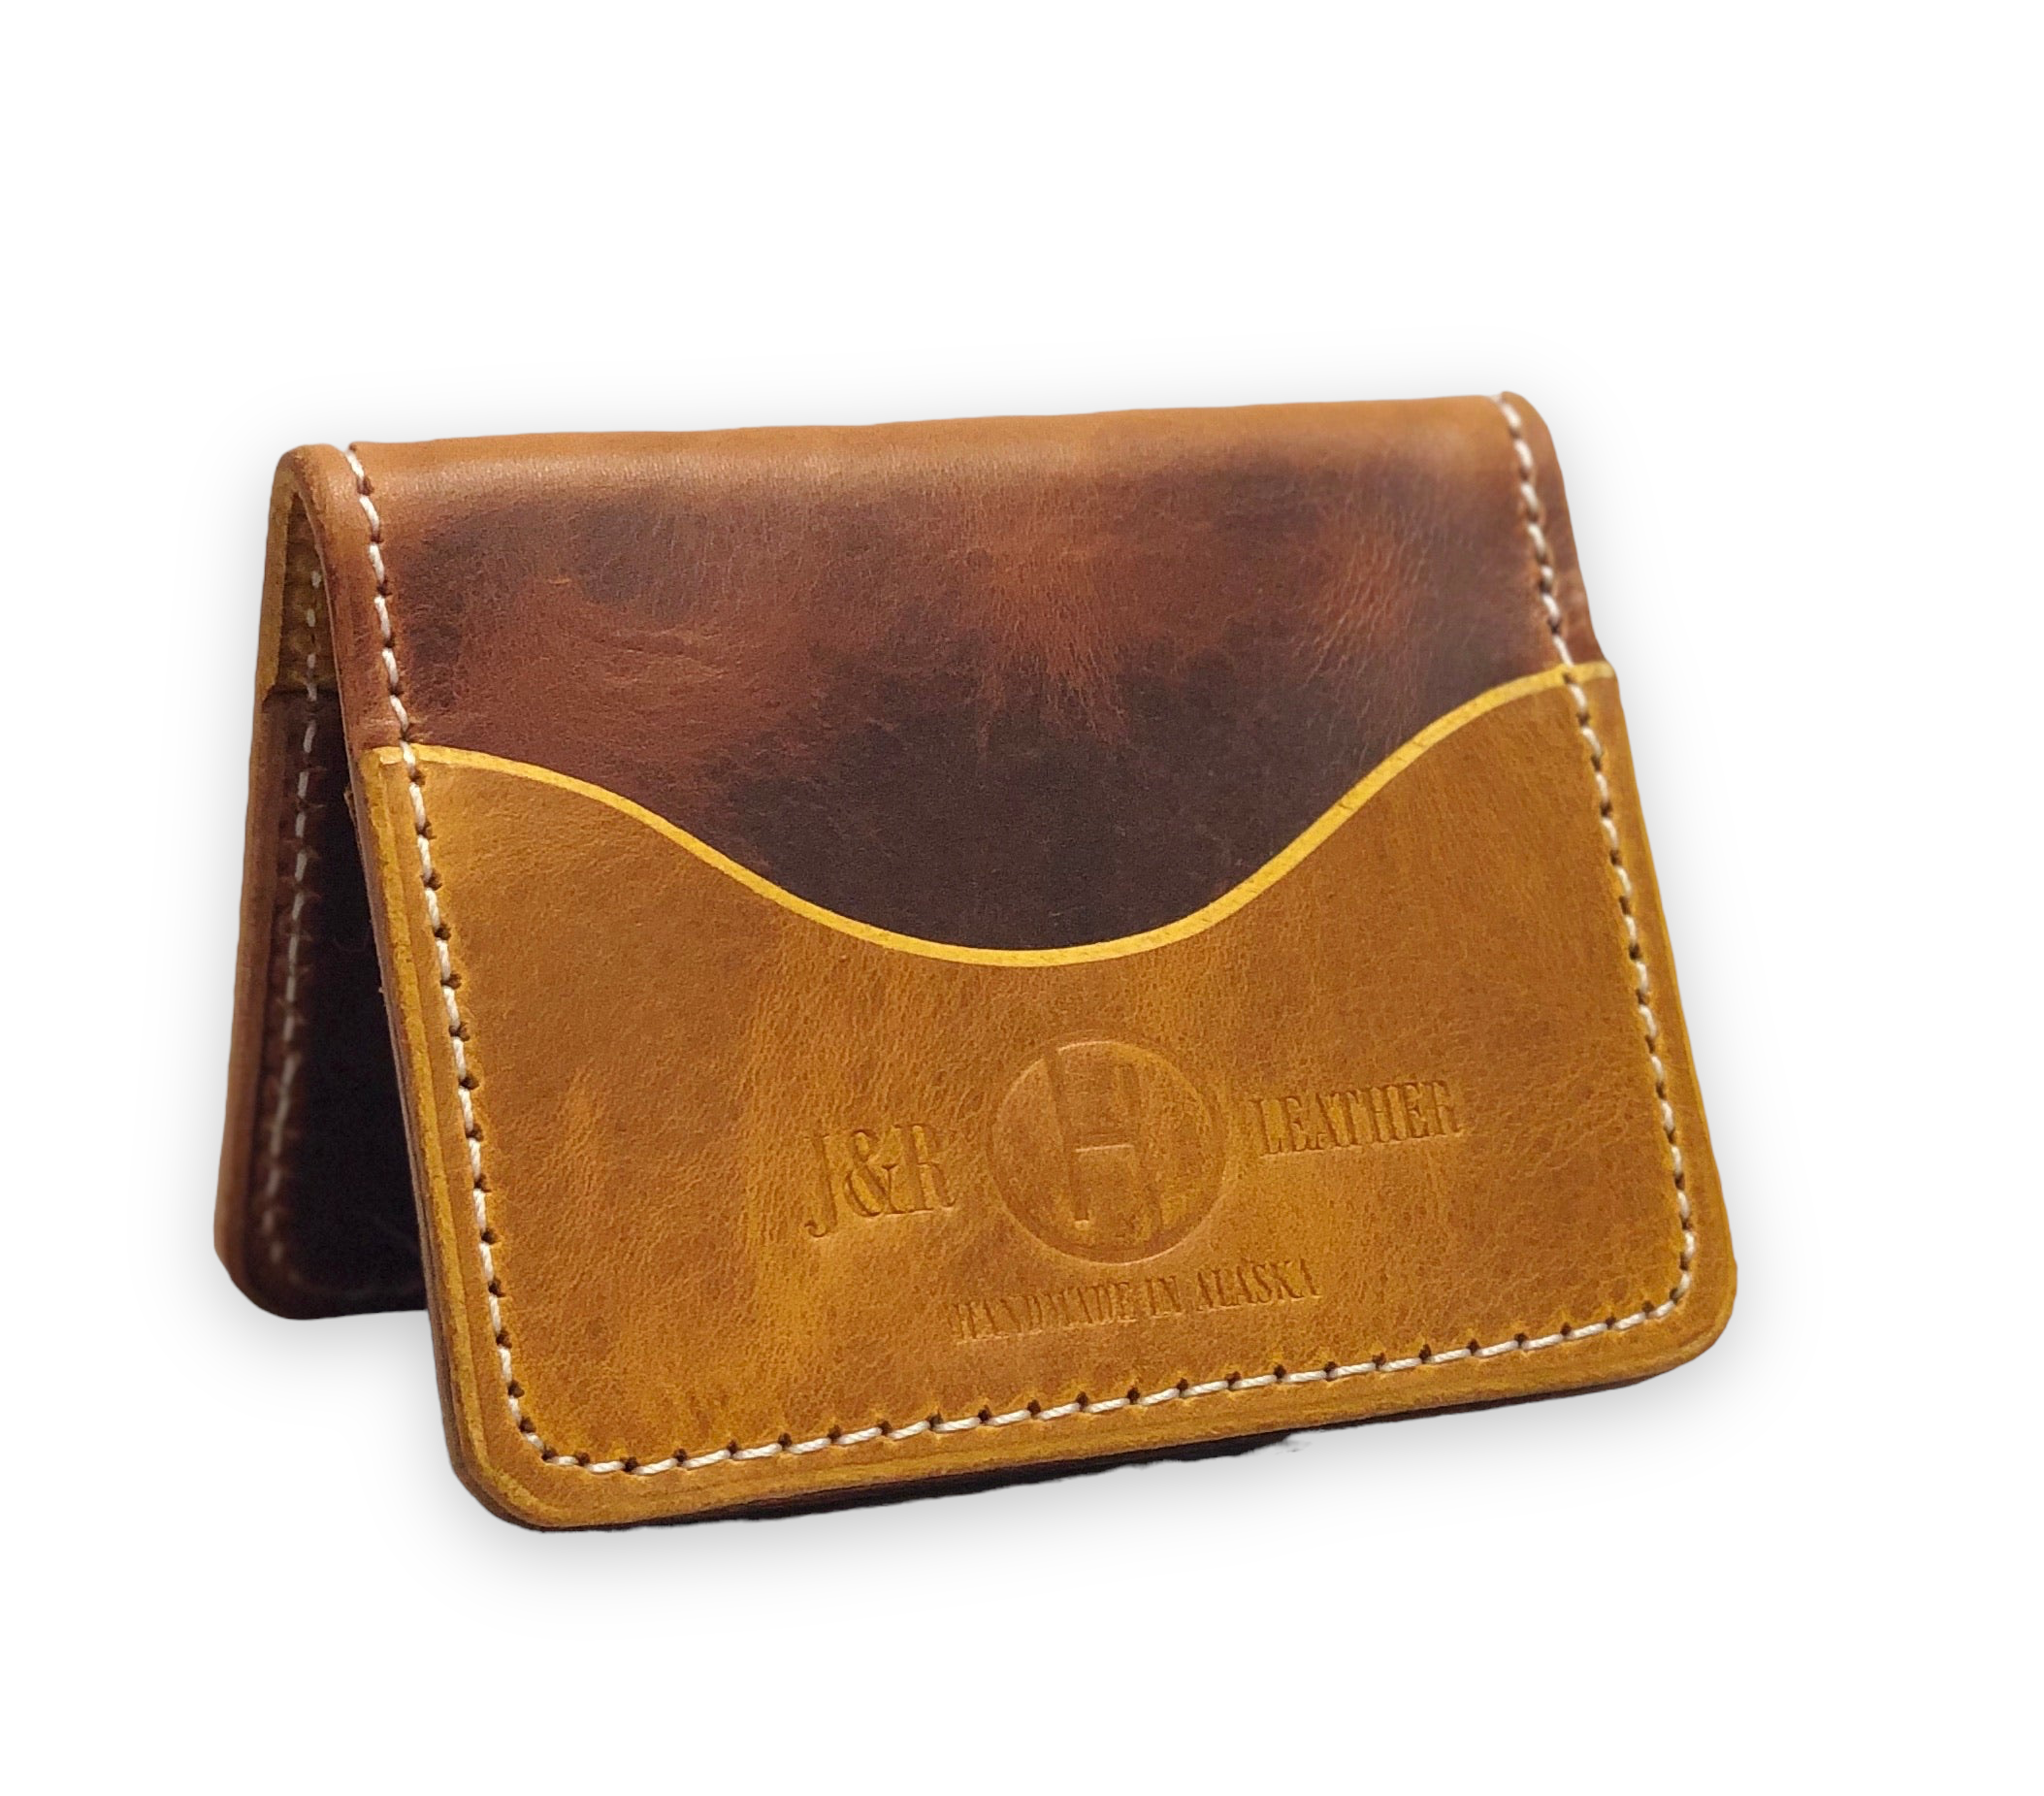 Yellow Minimalist Wallet With Coin Pocket